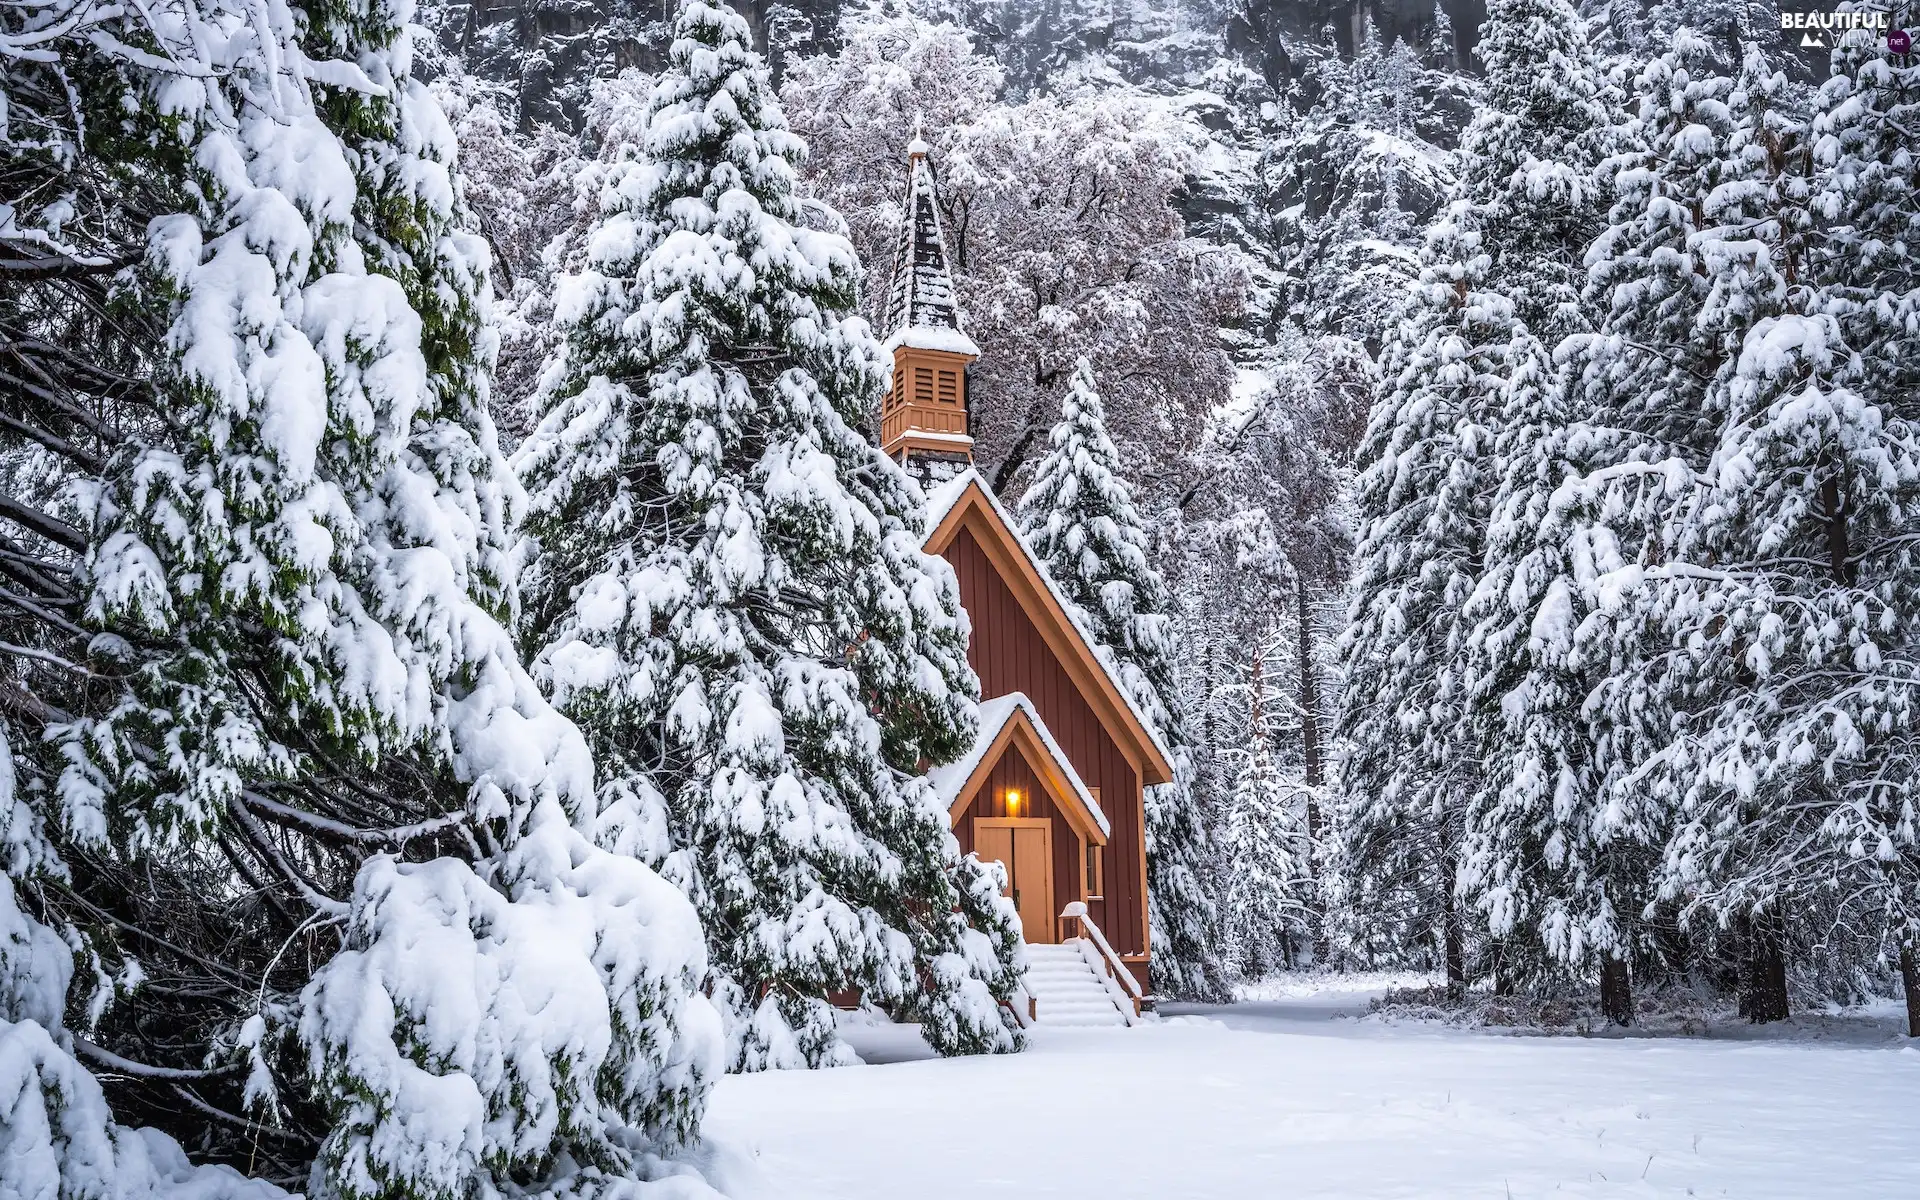 snow, trees, chapel, State of California, church, winter, viewes, The United States, Yosemite National Park, forest